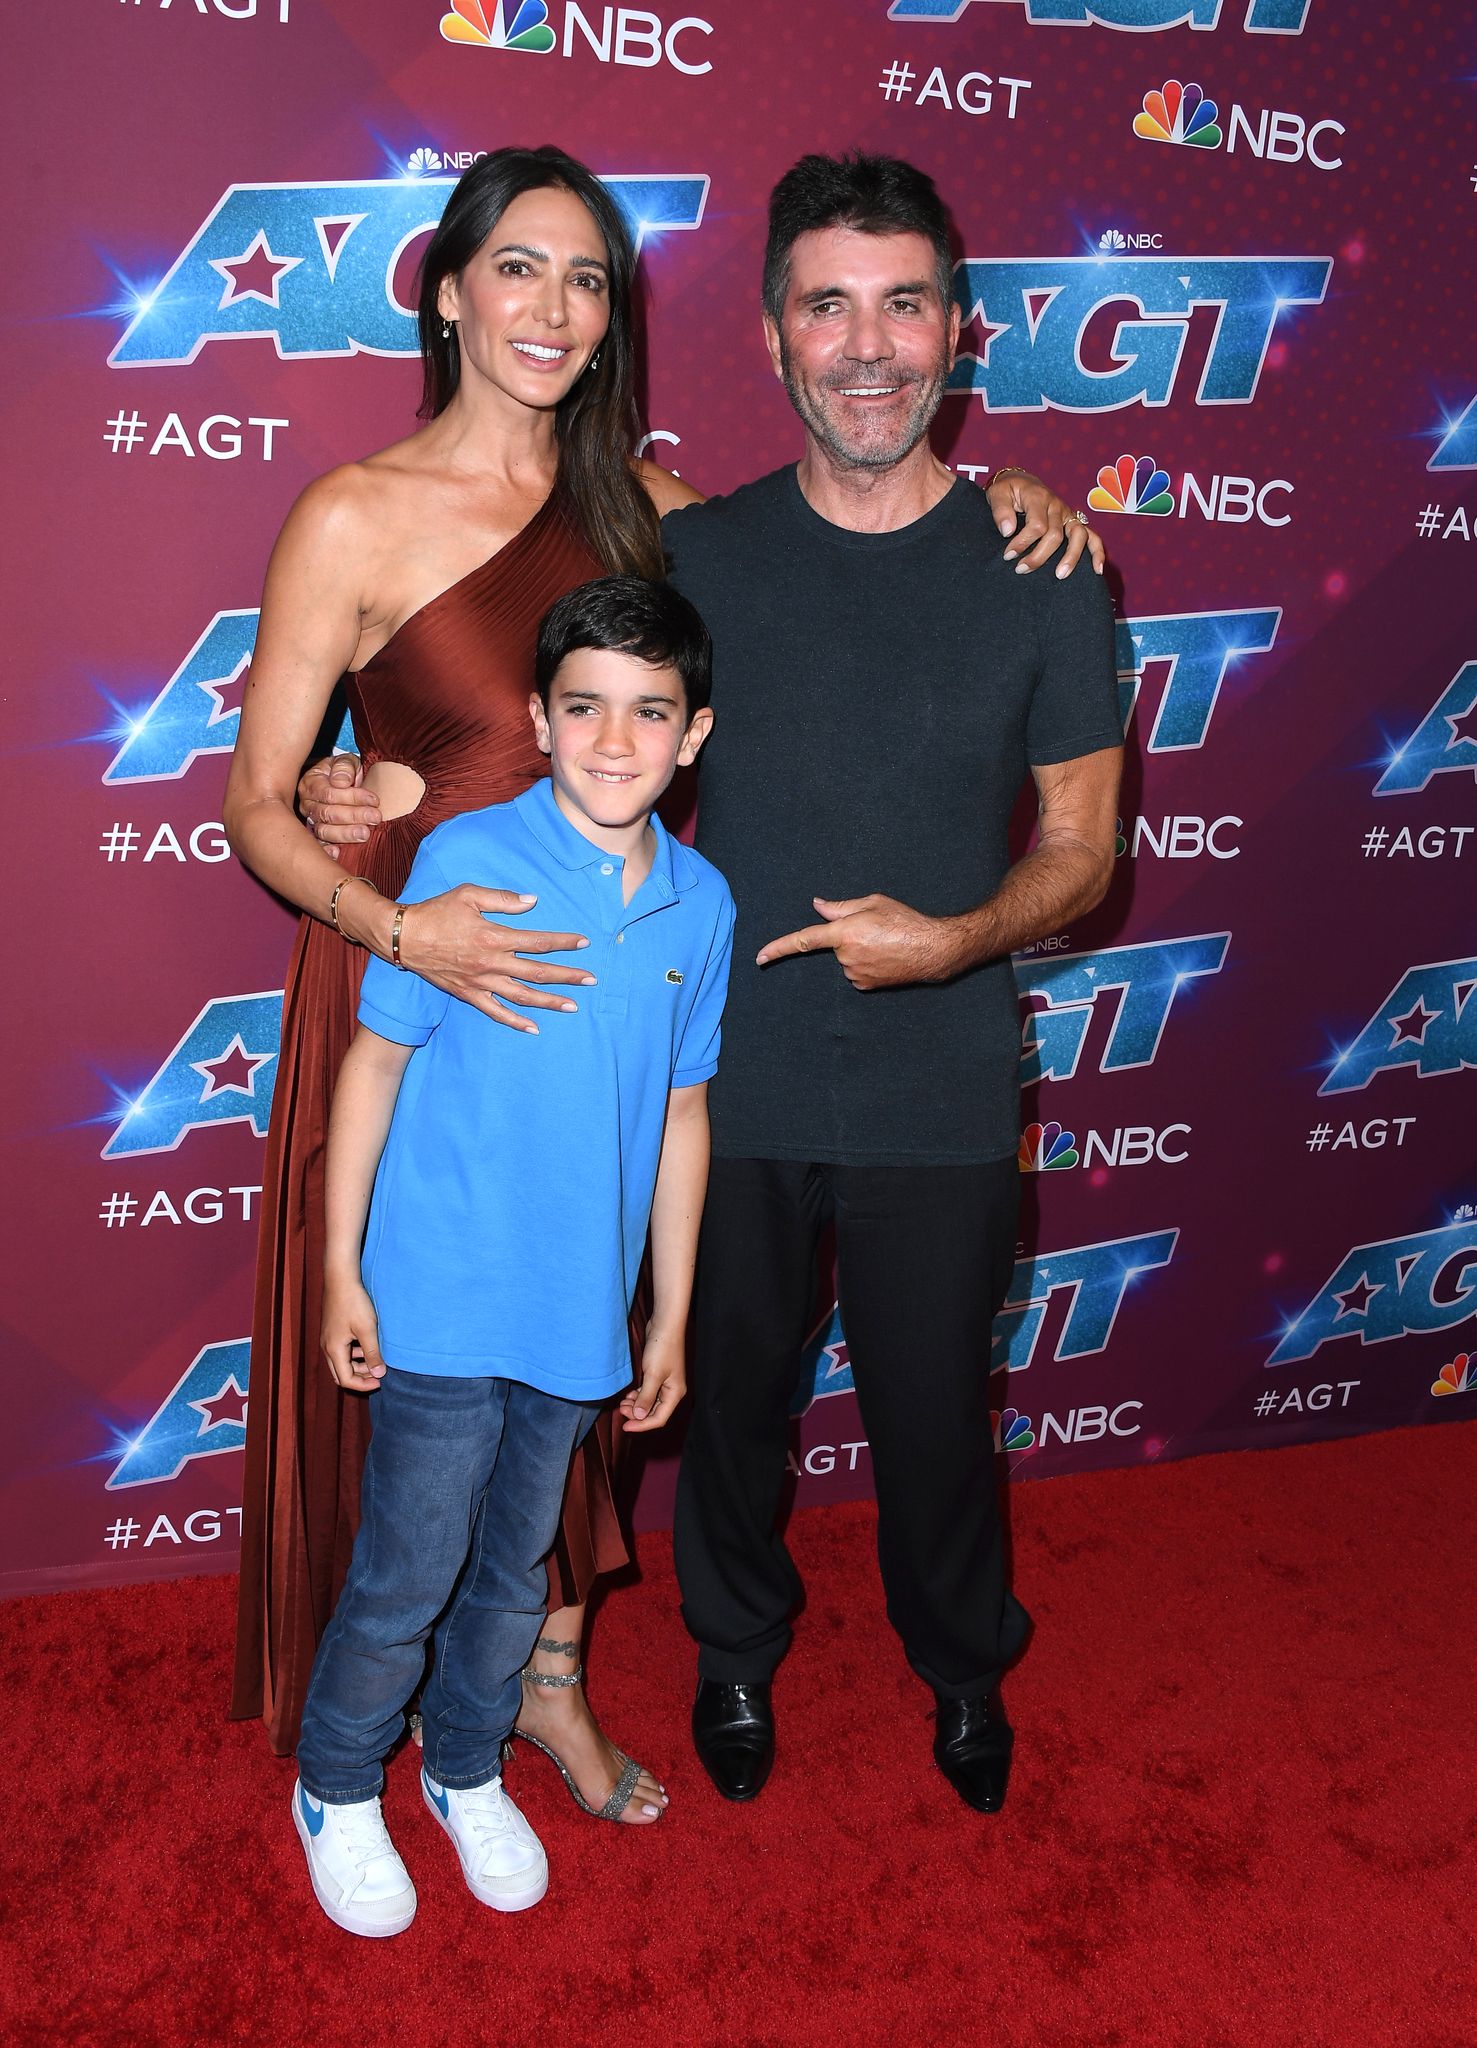 Simon and Eric Cowell with Lauren Silverman at the "America's Got Talent" Live Show at Pasadena Sheraton Hotel on September 13, 2022 | Source: Getty Images